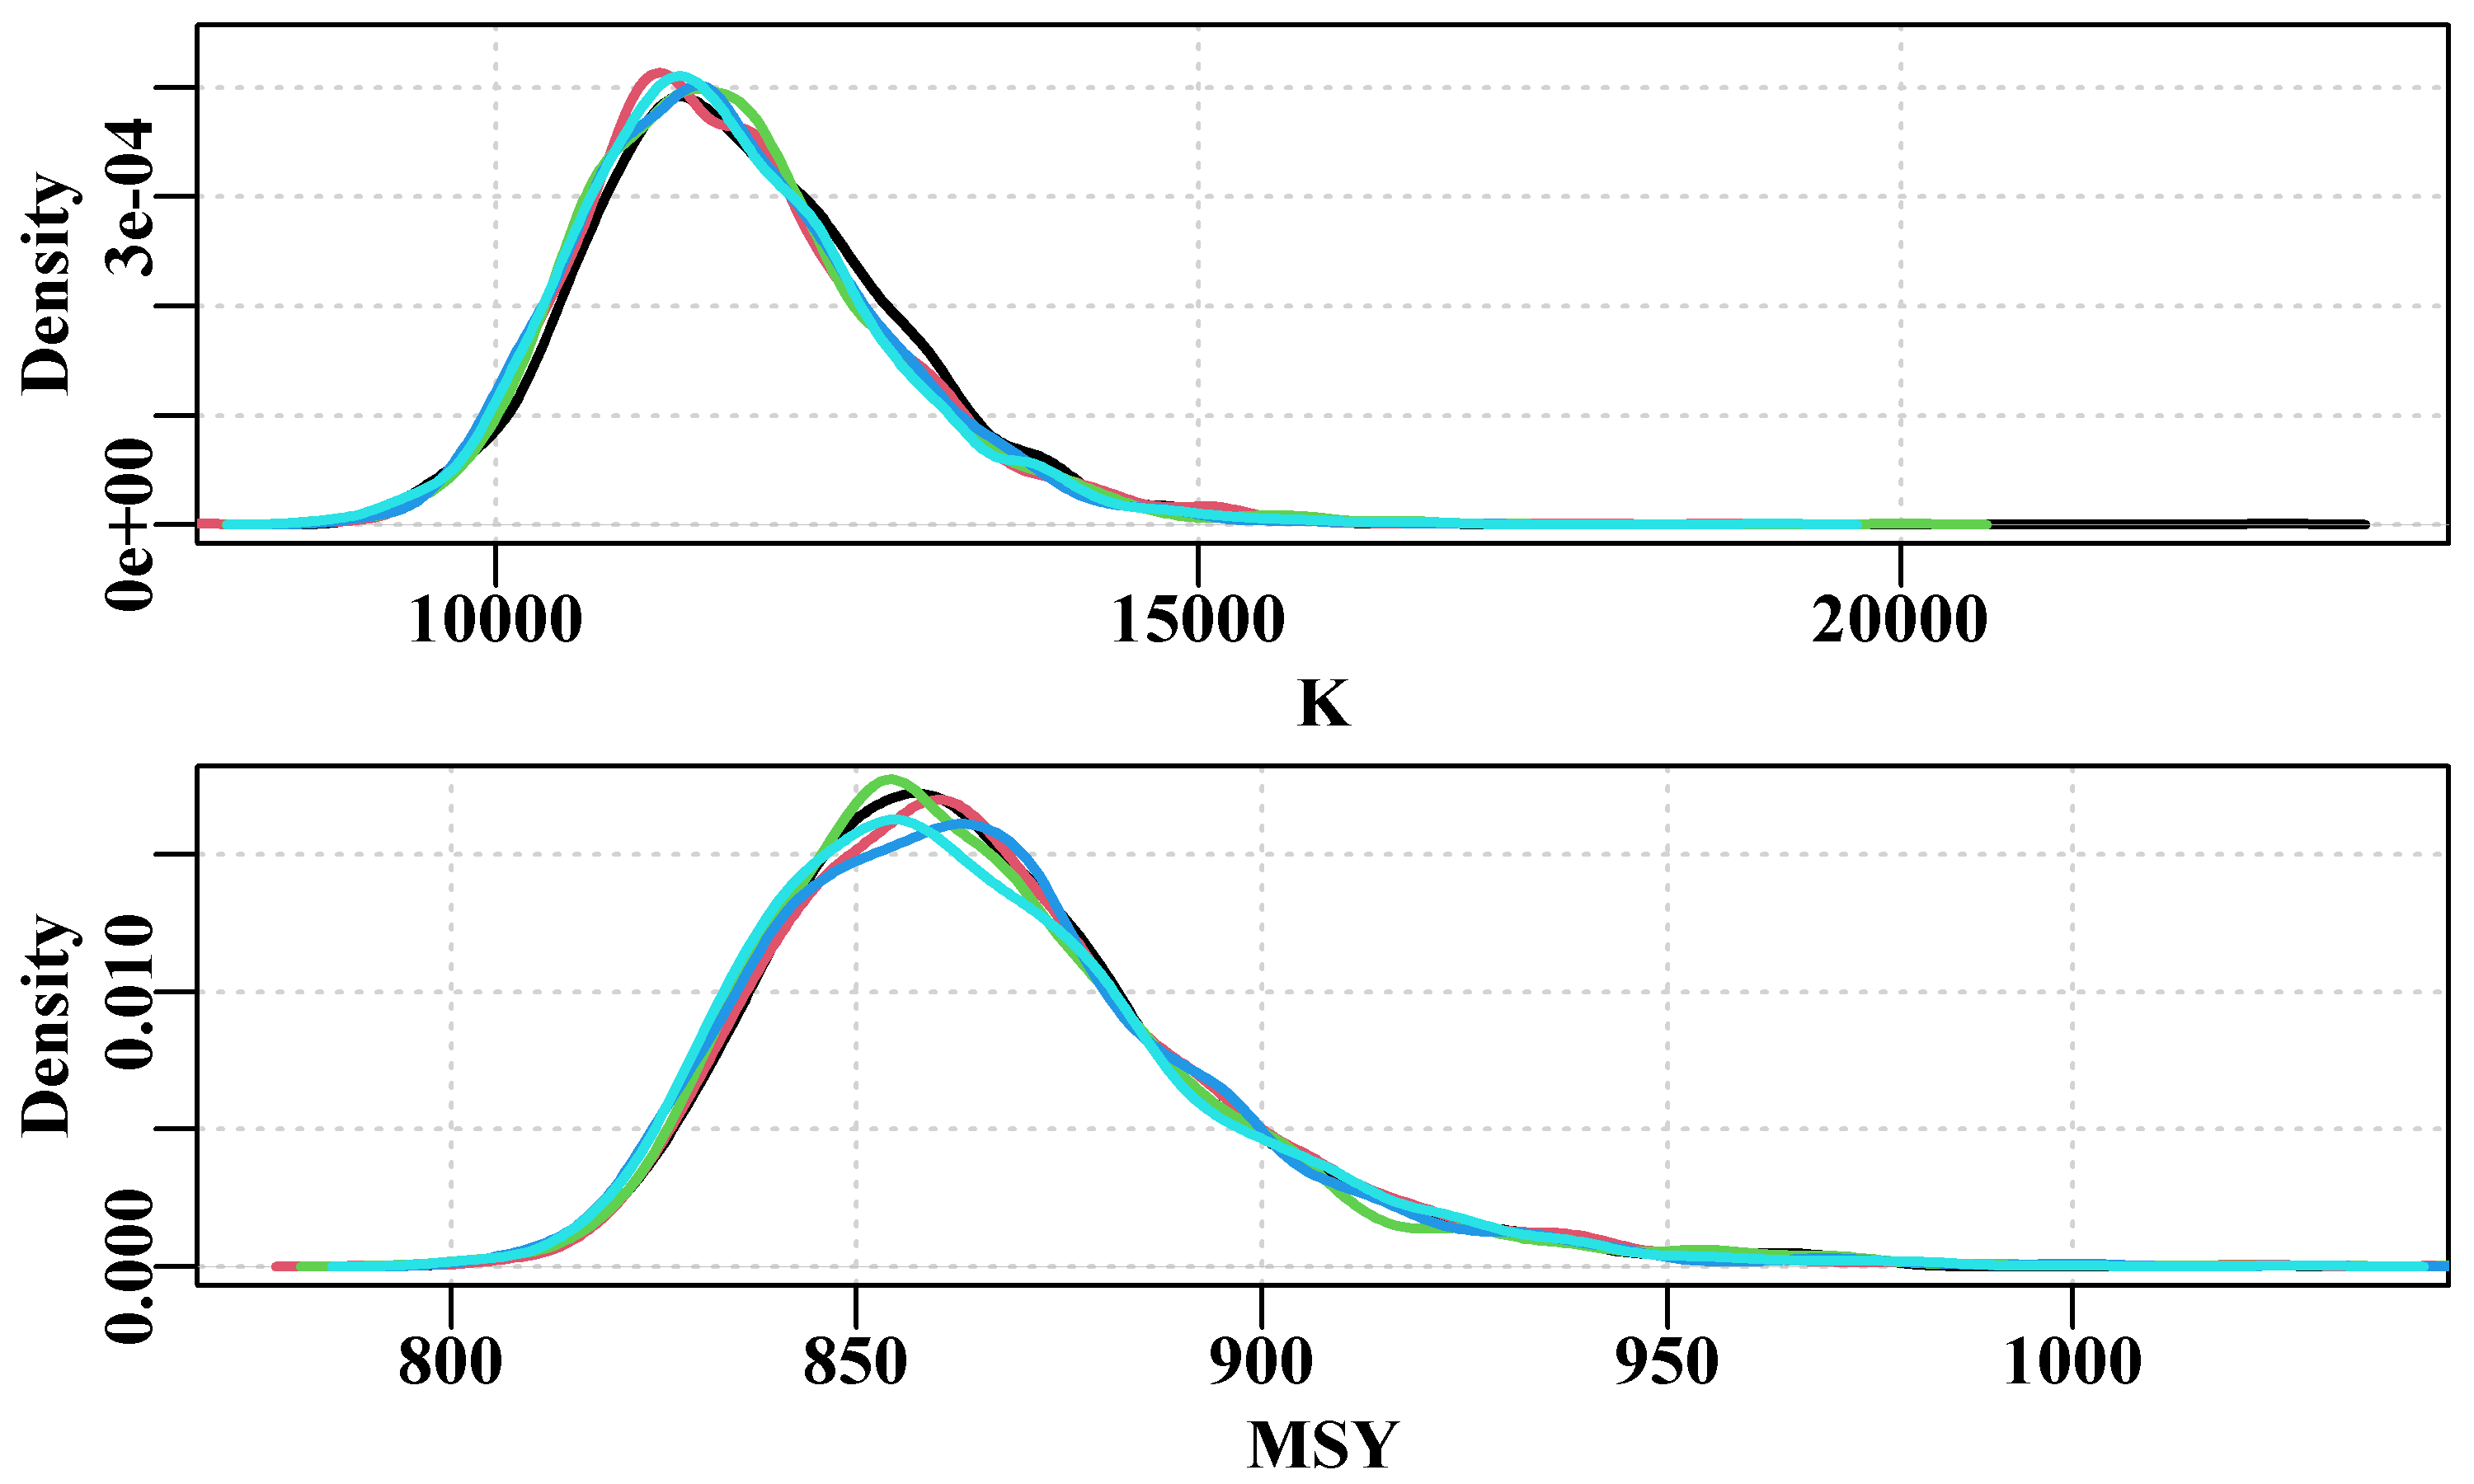 the marginal posterior for the K parameter and the implied MSY from five chains of 2000 replicates (512 * 2000 = 1049600 iterations). Some variation remains between the distributions, especially at the mode, suggesting that more replicates and potentially a higher thinning rate would improve the outcome.